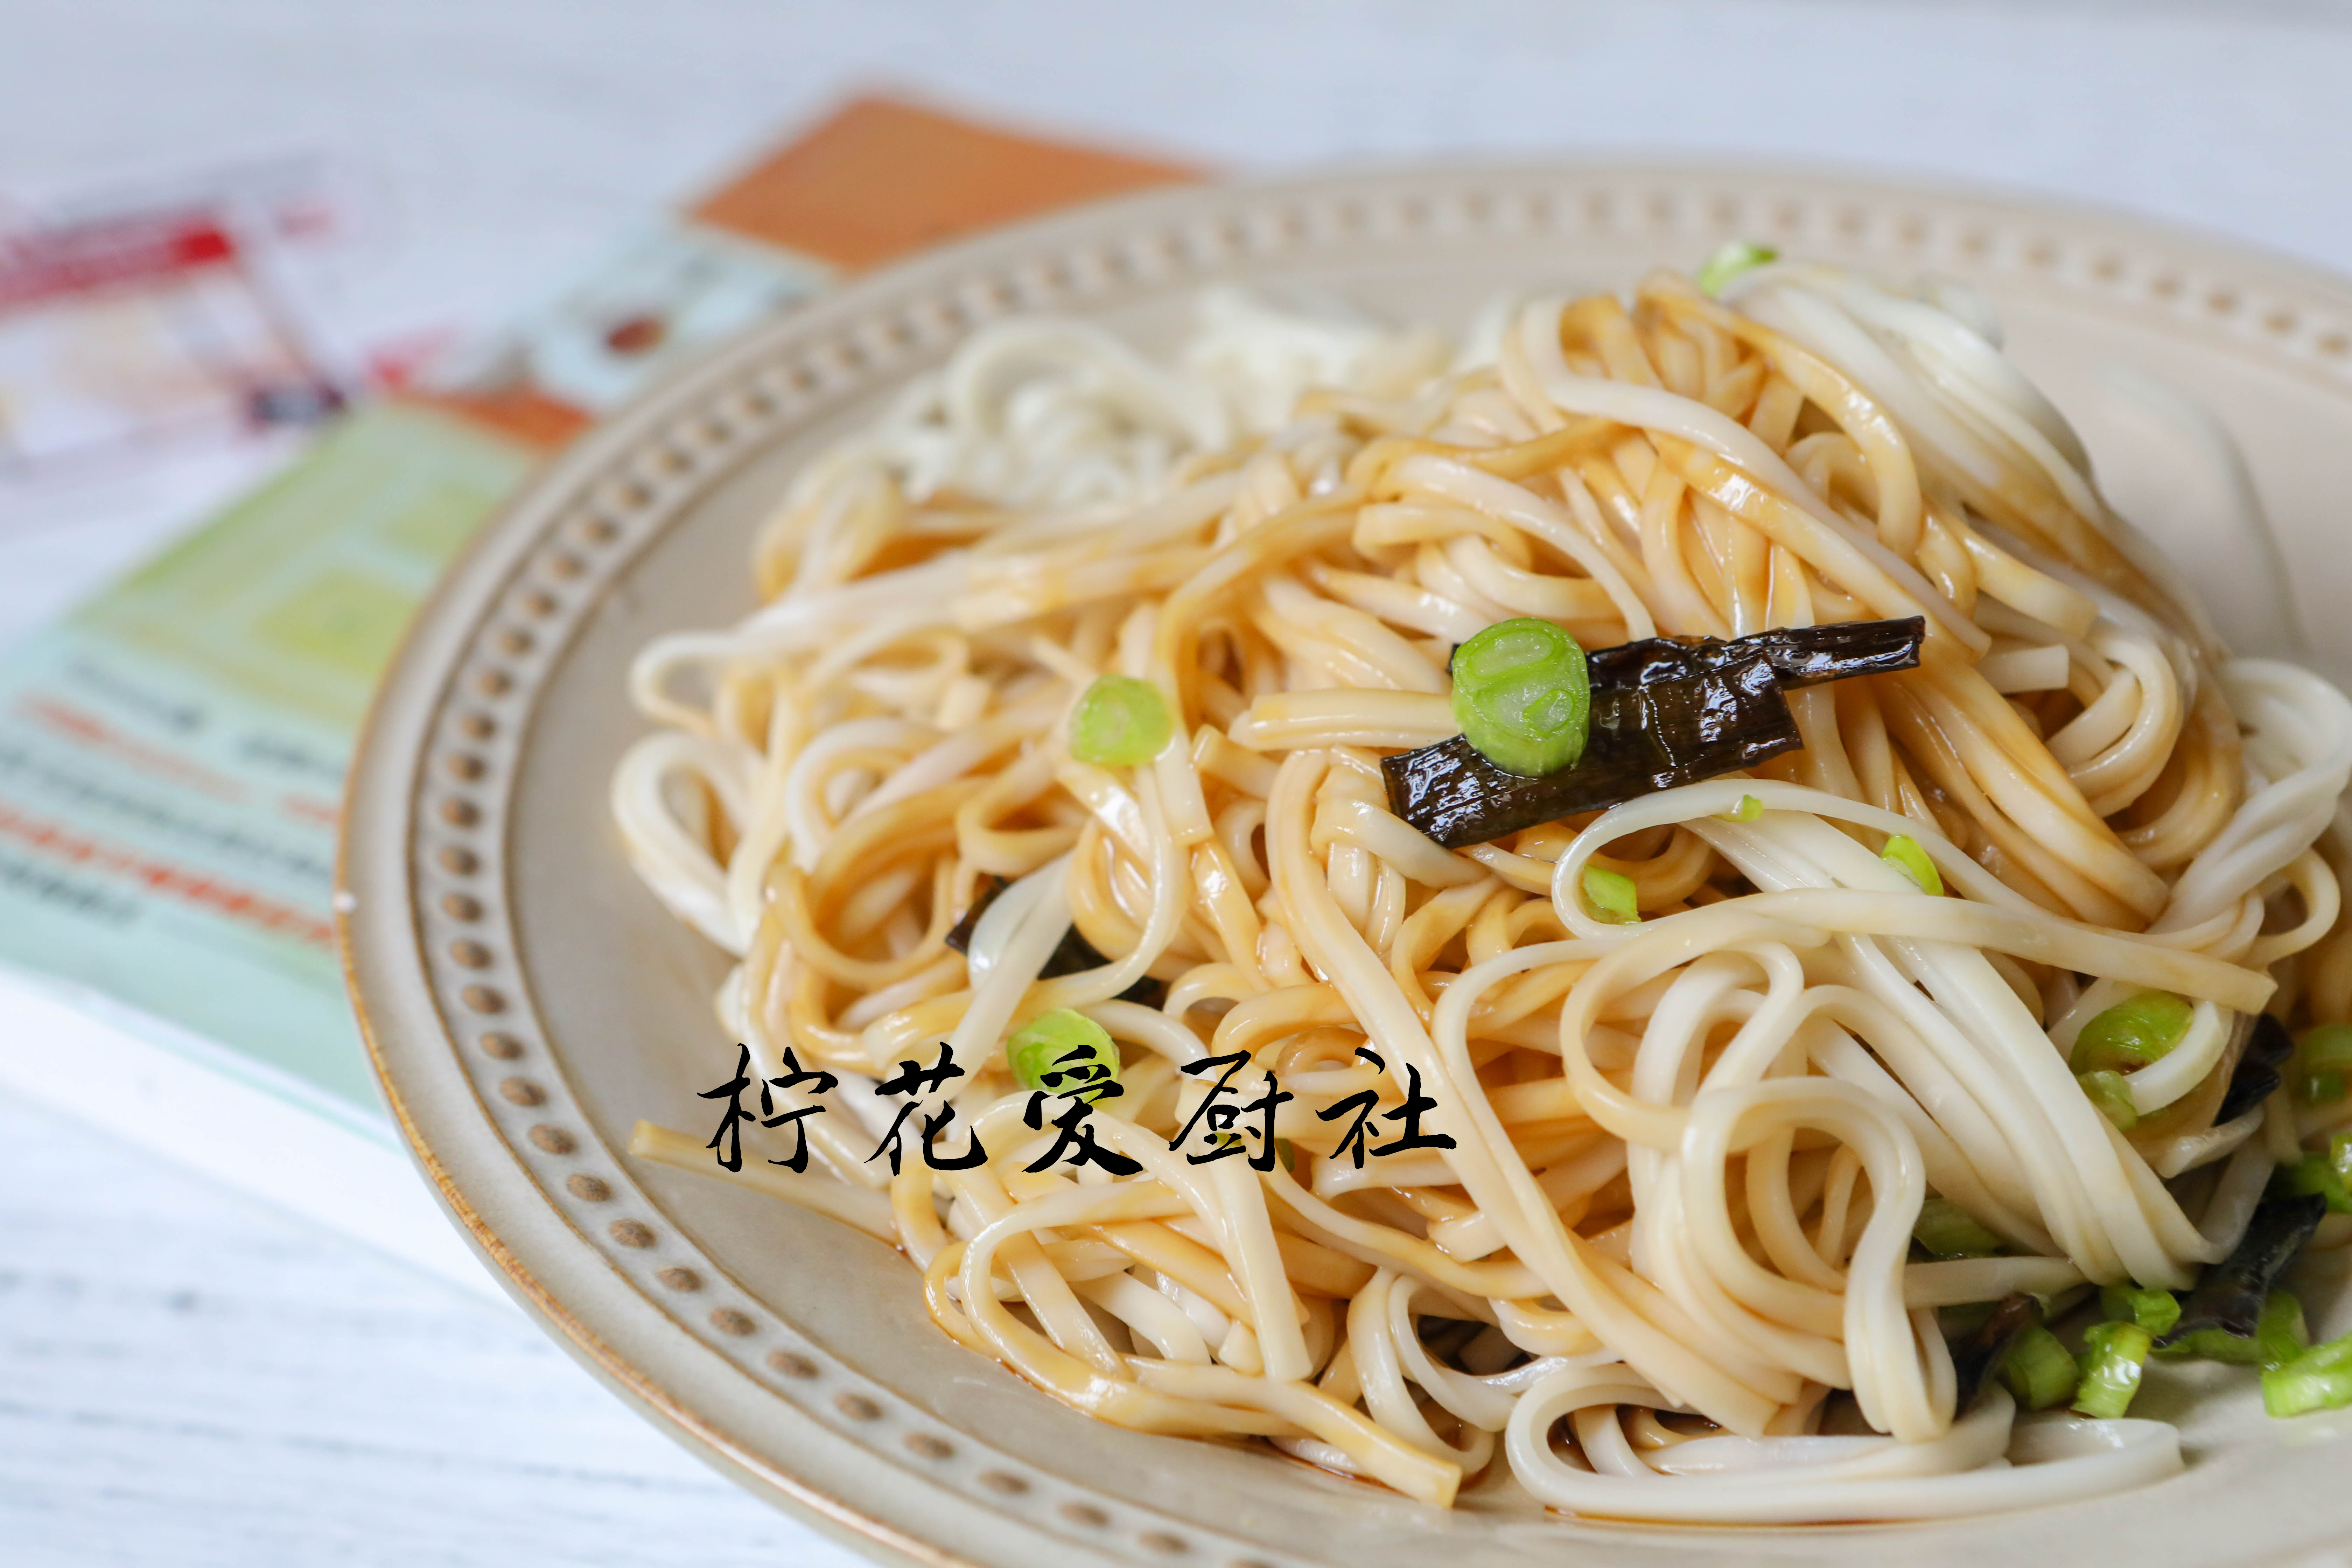 
Green oily noodles served with soy sauce says: Always having a bowl of side is simple delicious practice